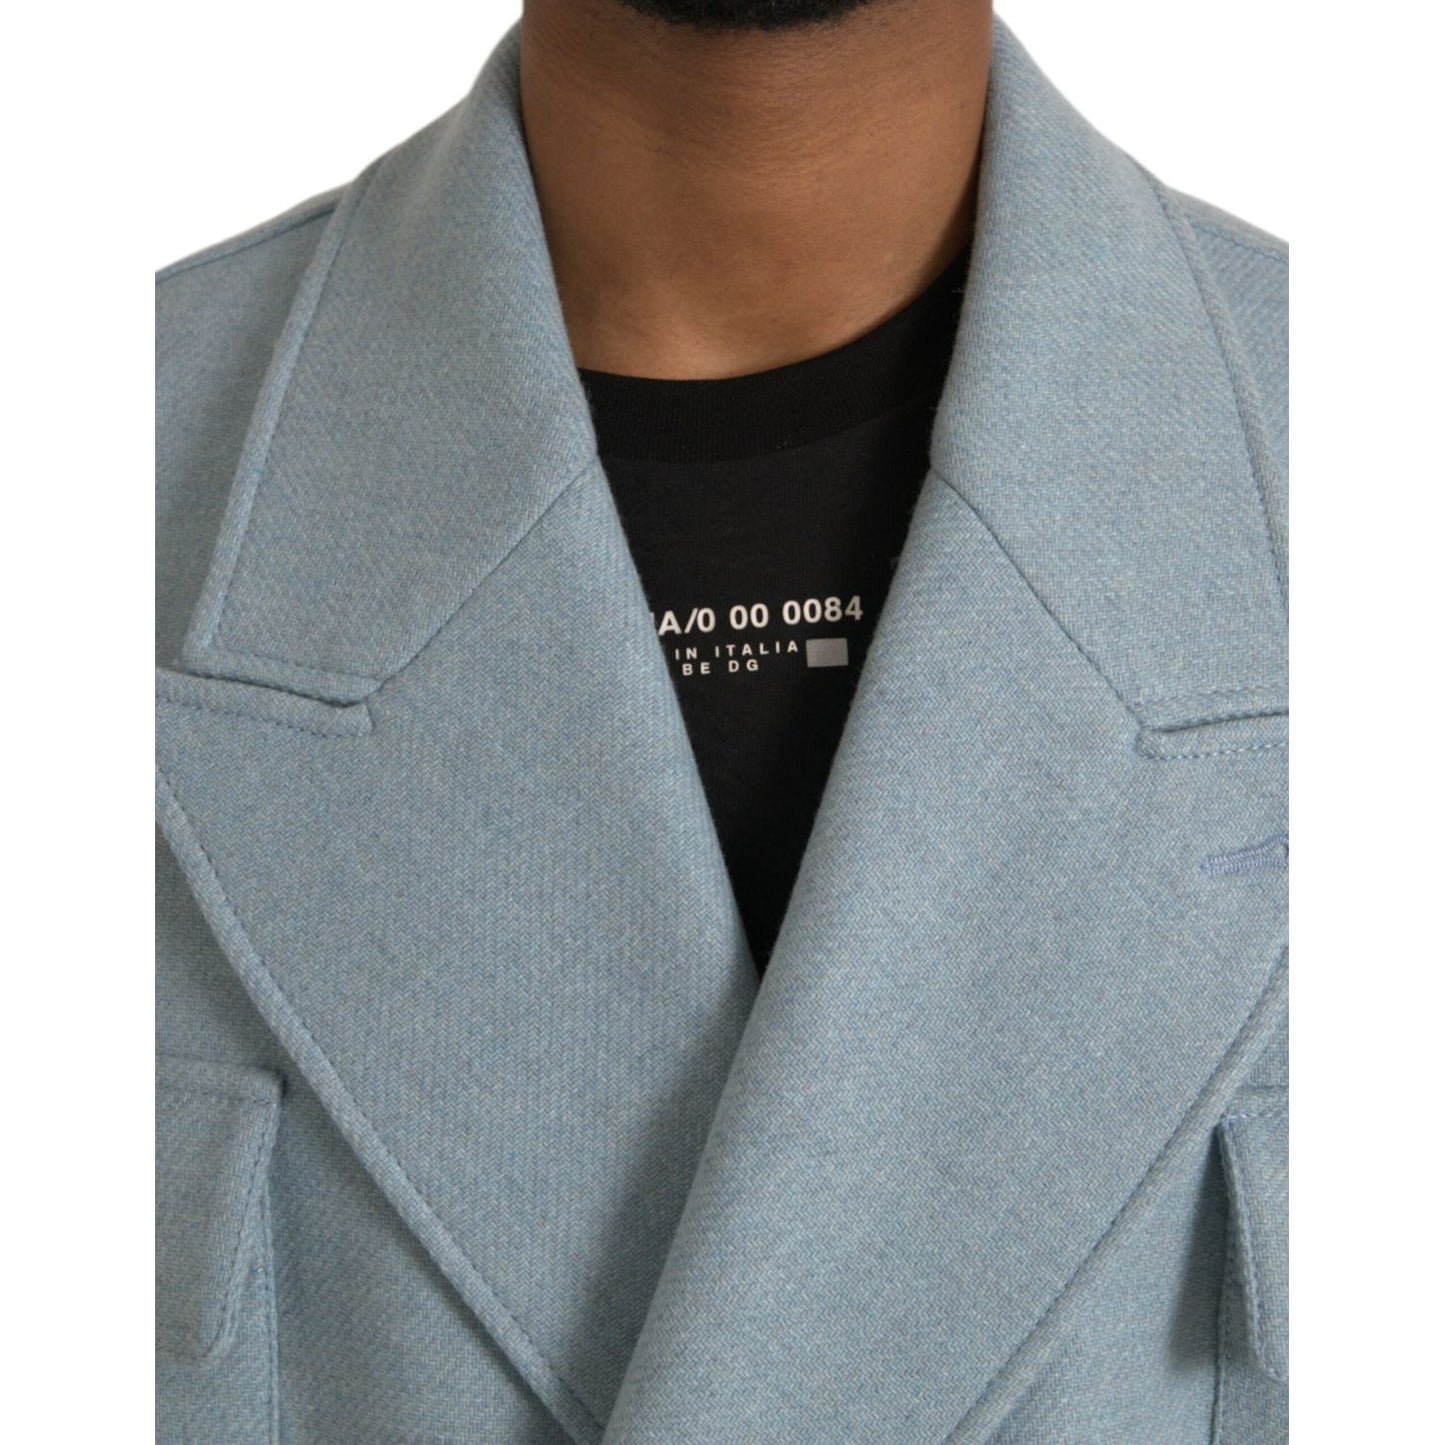 Dolce & Gabbana Blue Double Breasted Trench Coat Jacket blue-double-breasted-trench-coat-jacket